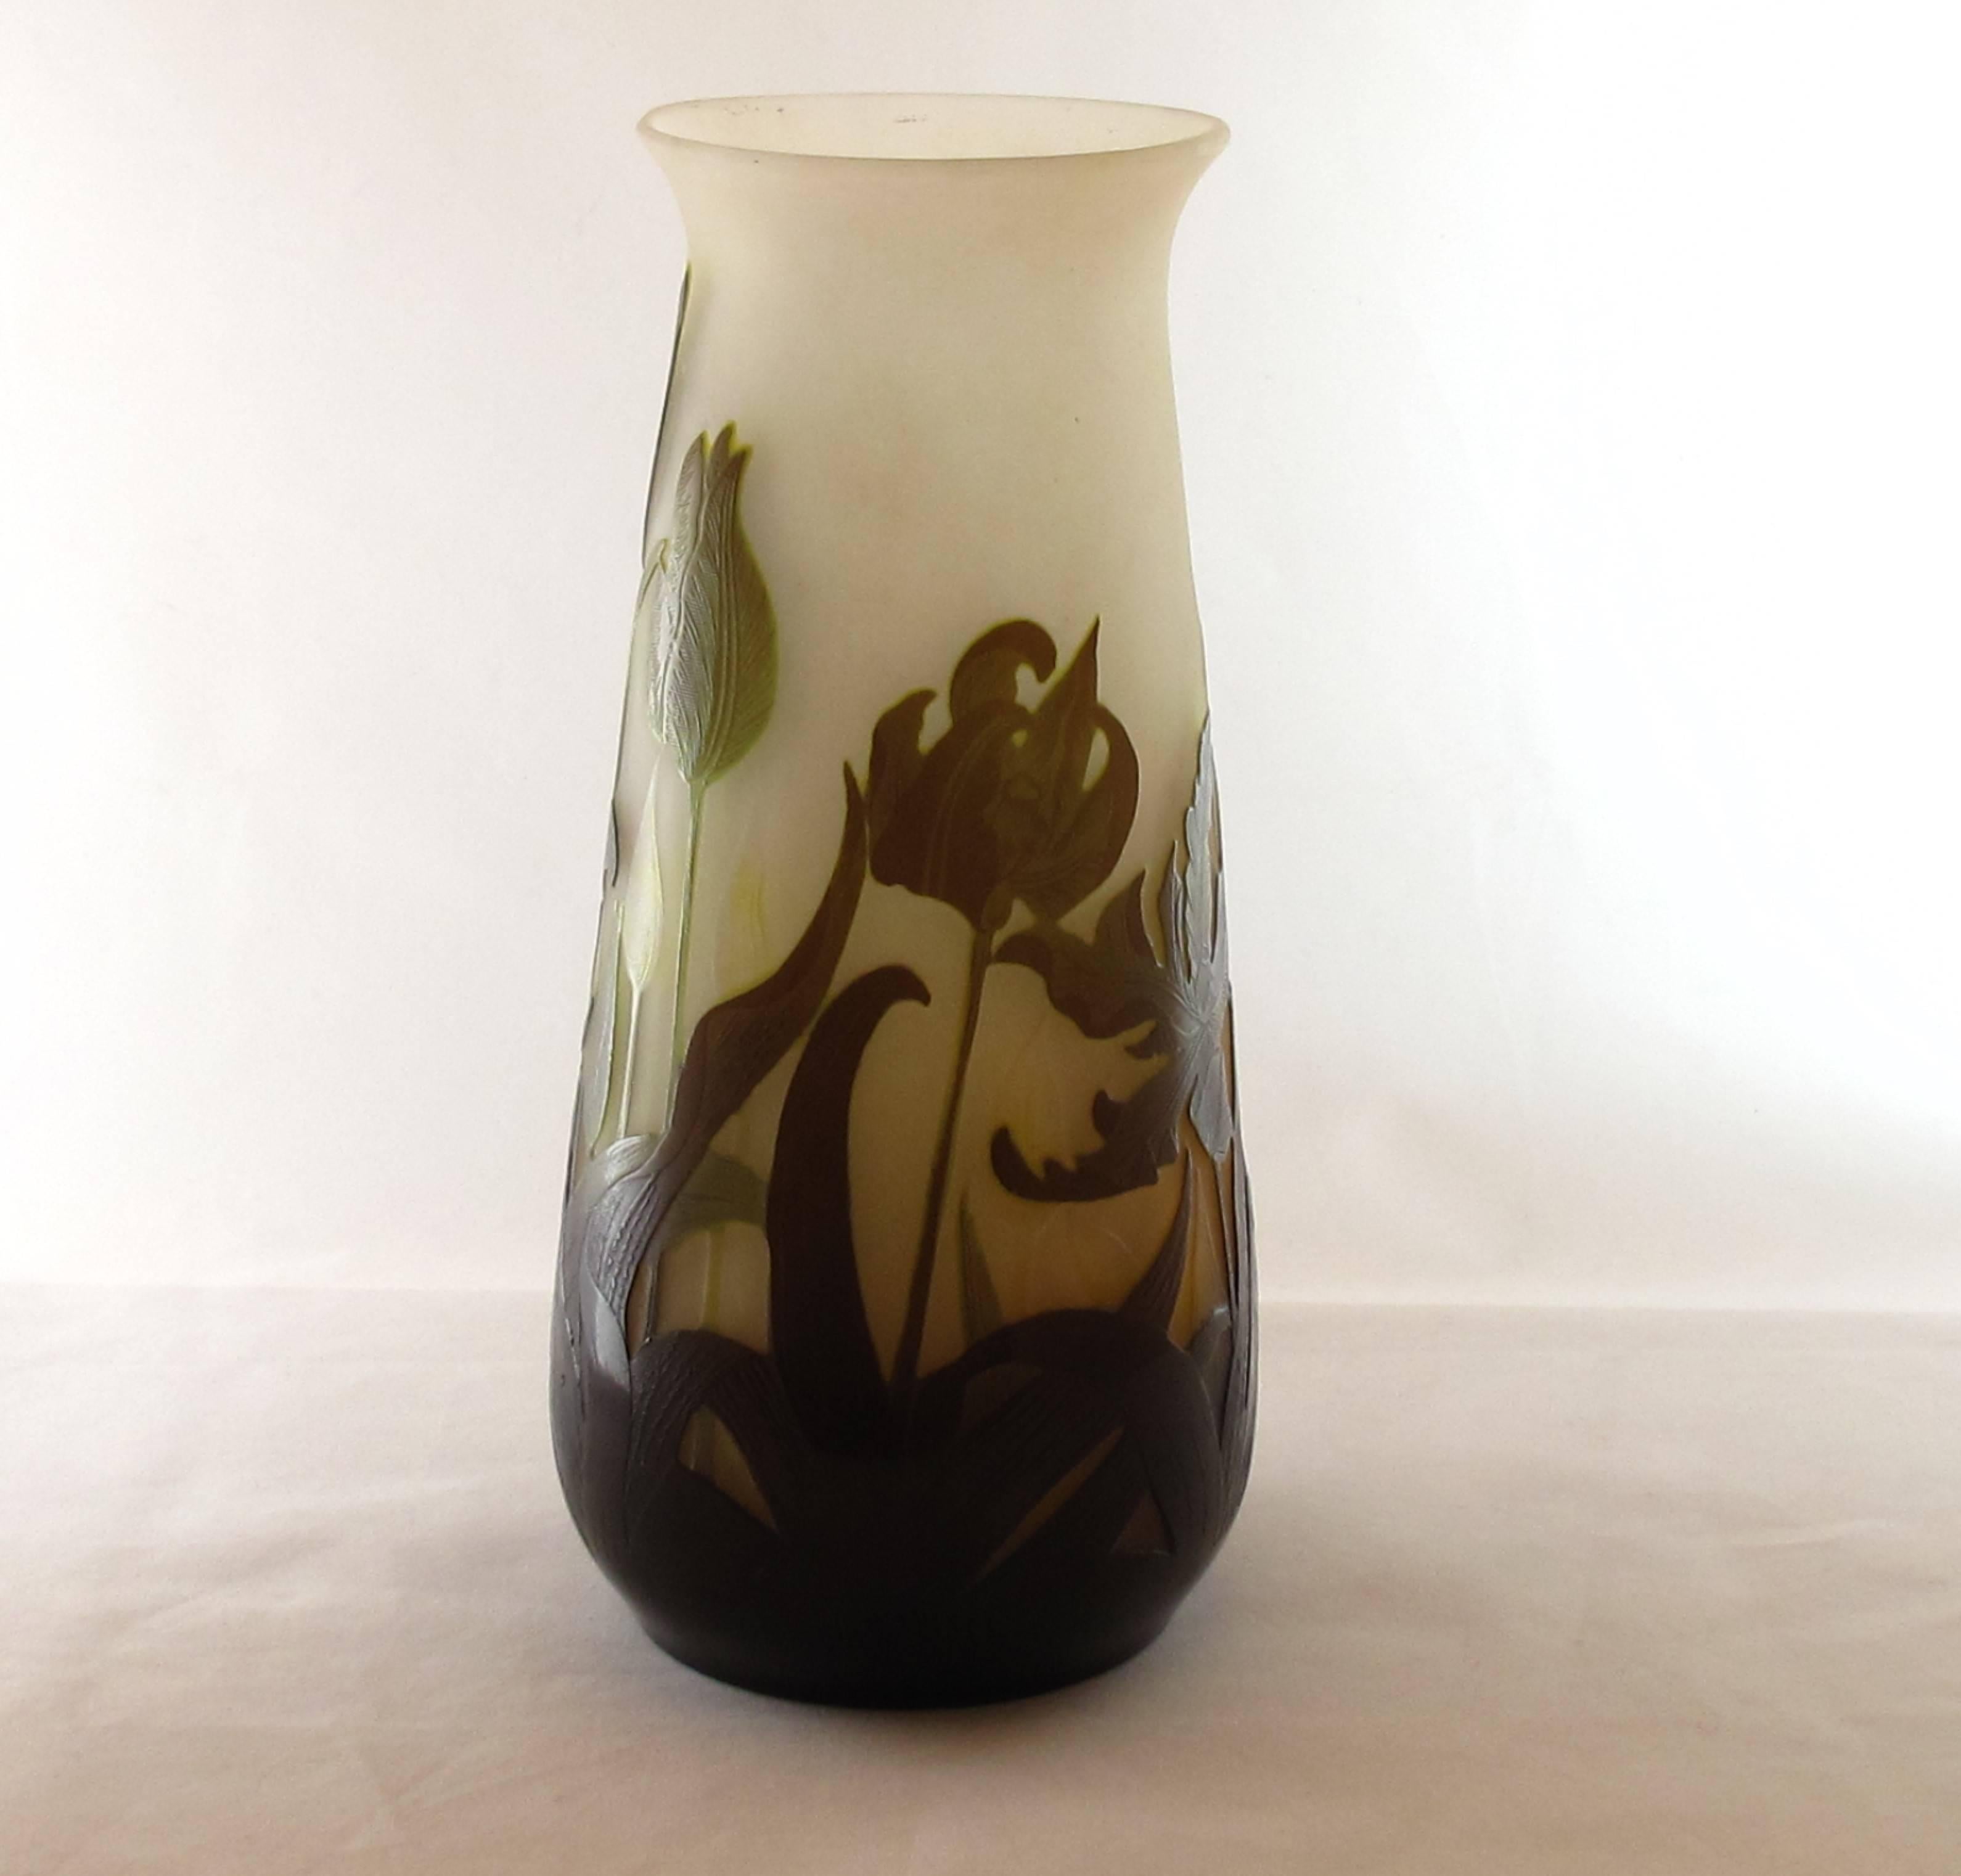 Art Nouveau acid etched cameo glass vase by Emile Galle, French, circa 1900. Finely decorated with botanical tulips. Signed in cameo Galle. Excellent original condition and a stunning piece. Approximate height 25 cm.

Emile Galle Nancy 1846 -